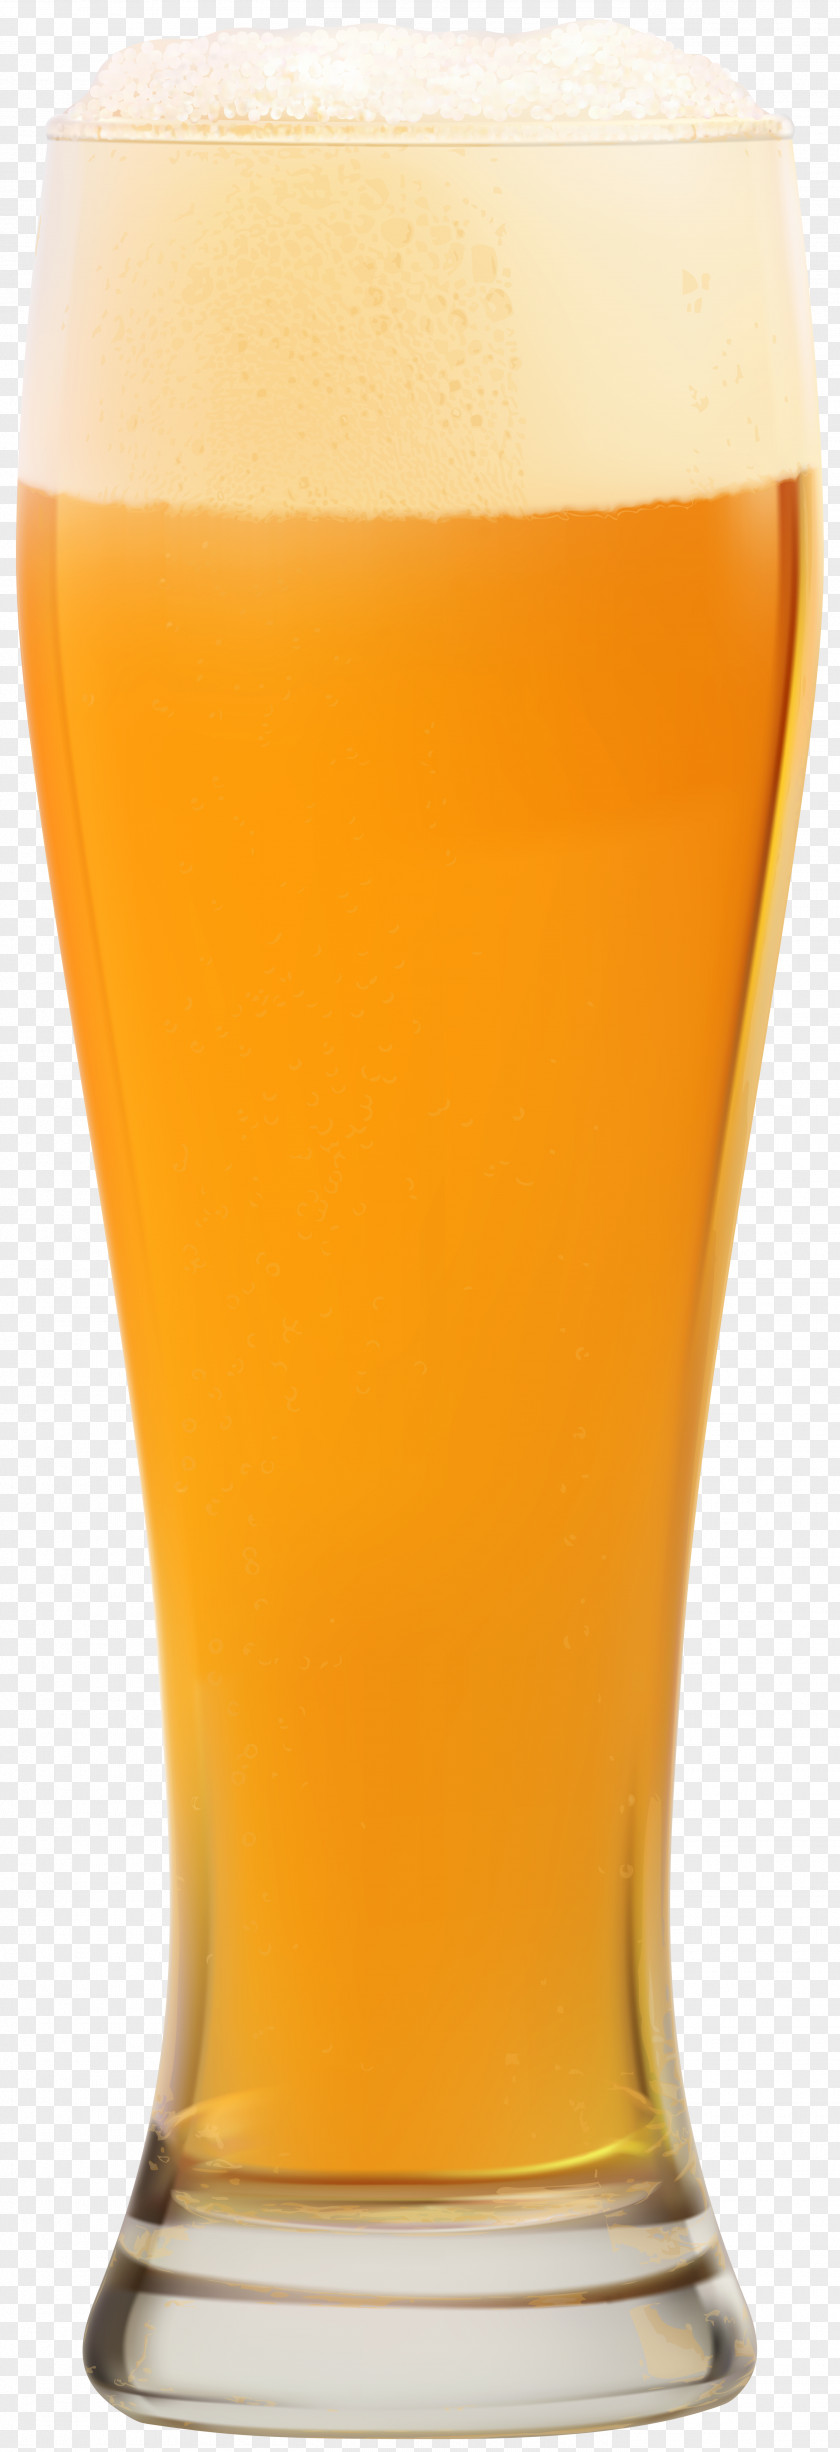 Beer Clip Art Image File Formats Lossless Compression PNG